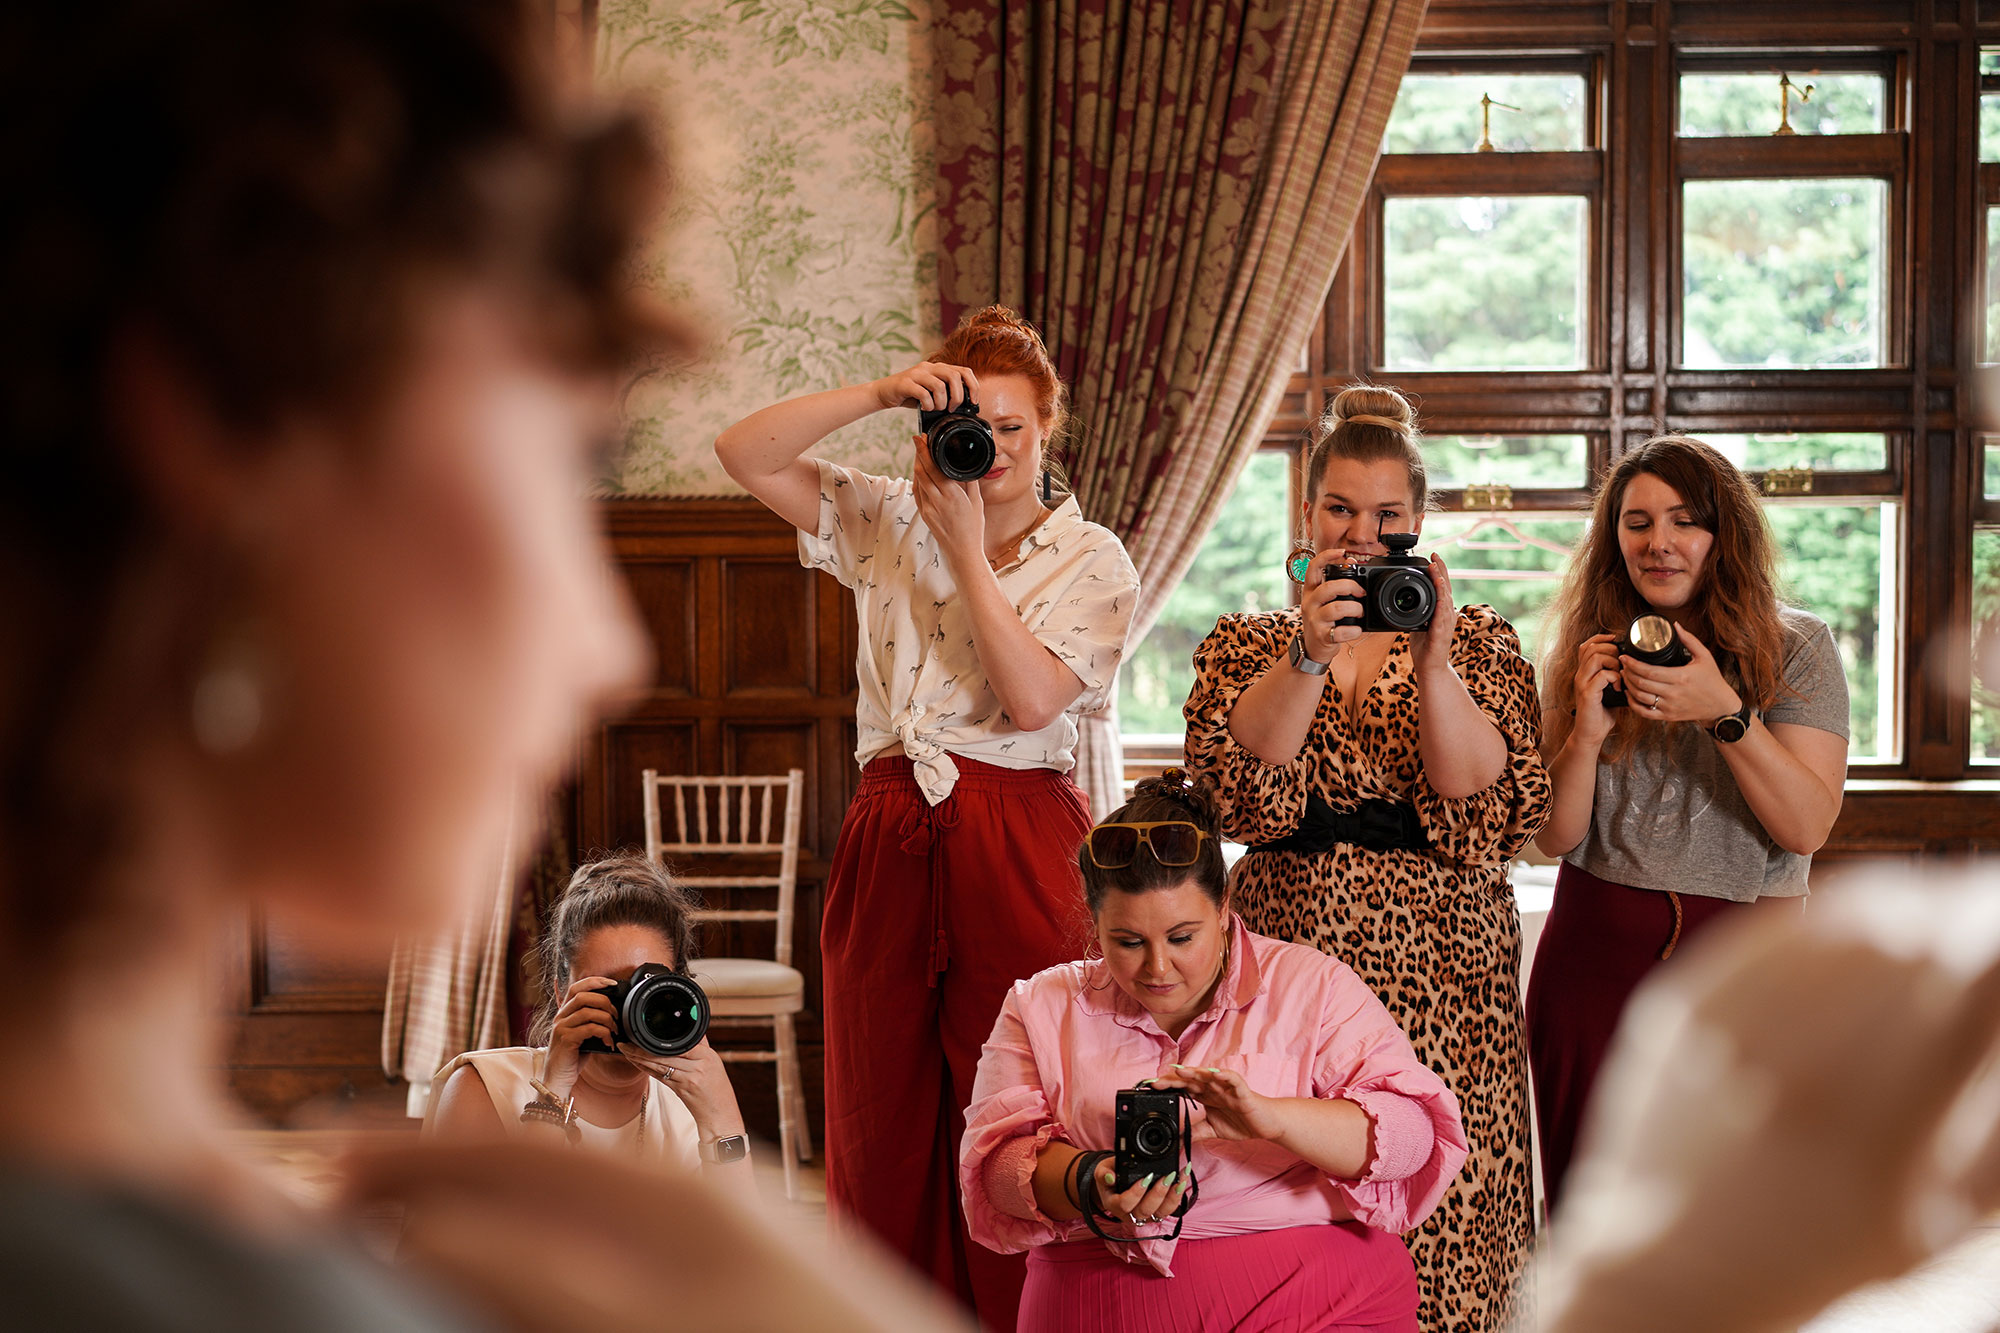 Behind The Scenes at The Regency Ball Photography Styled Shoot Day in Hertfordshire Photography Workshop © Tigz Rice Ltd